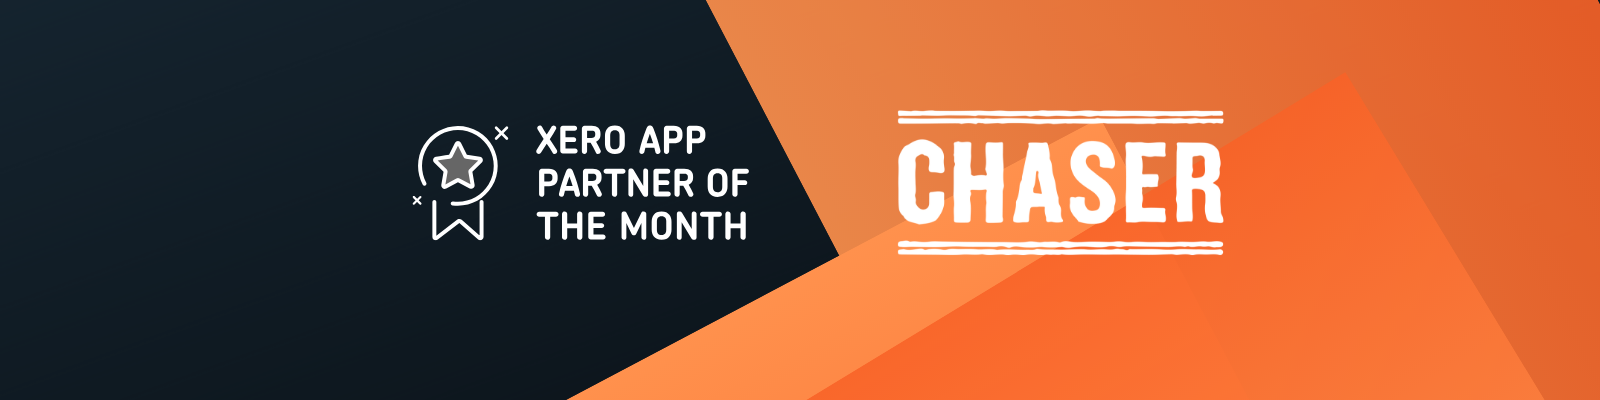 We are Xero's App Partner of the Month August 2019